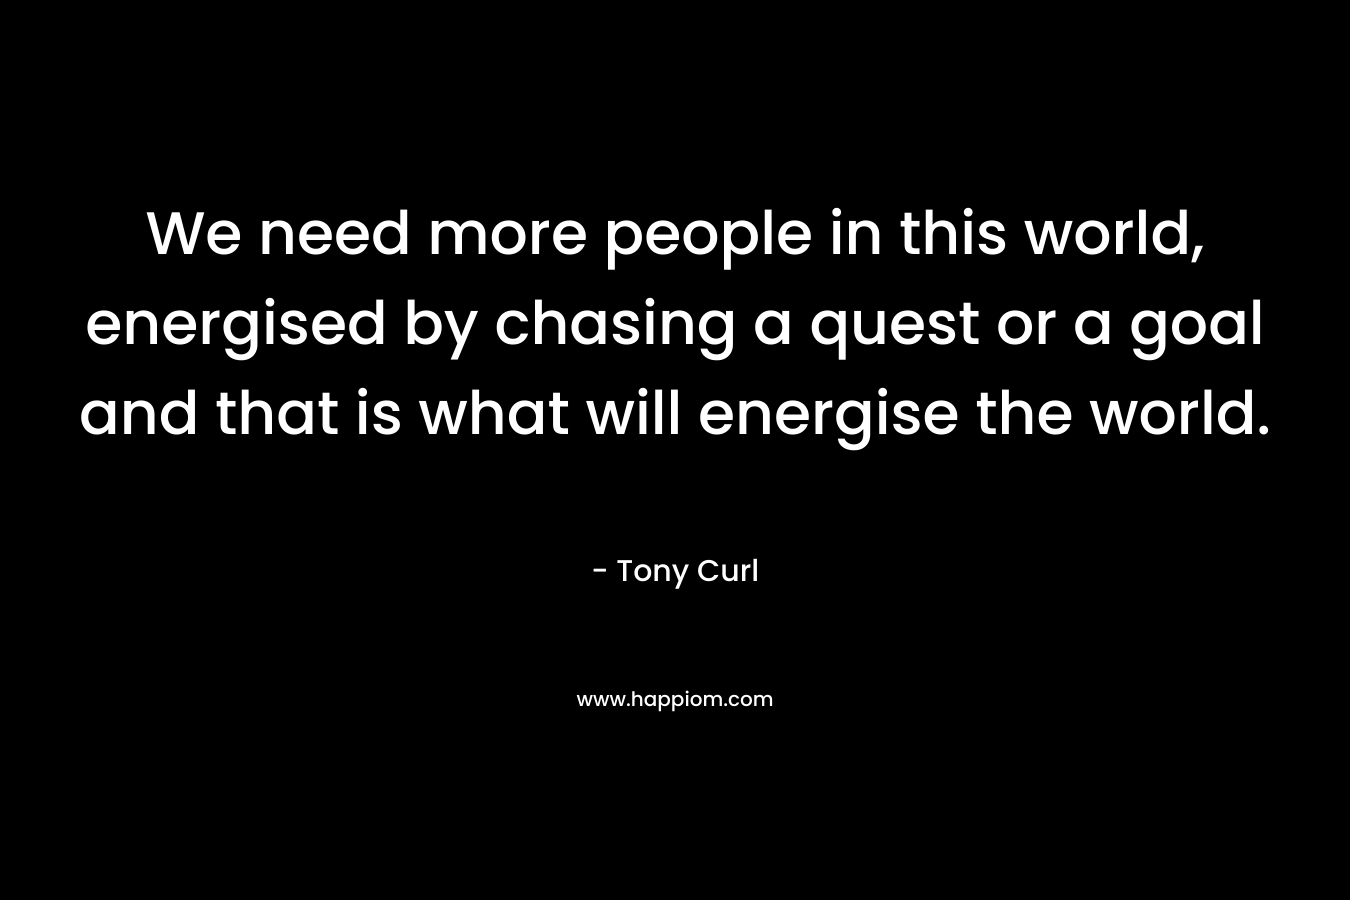 We need more people in this world, energised by chasing a quest or a goal and that is what will energise the world. – Tony Curl